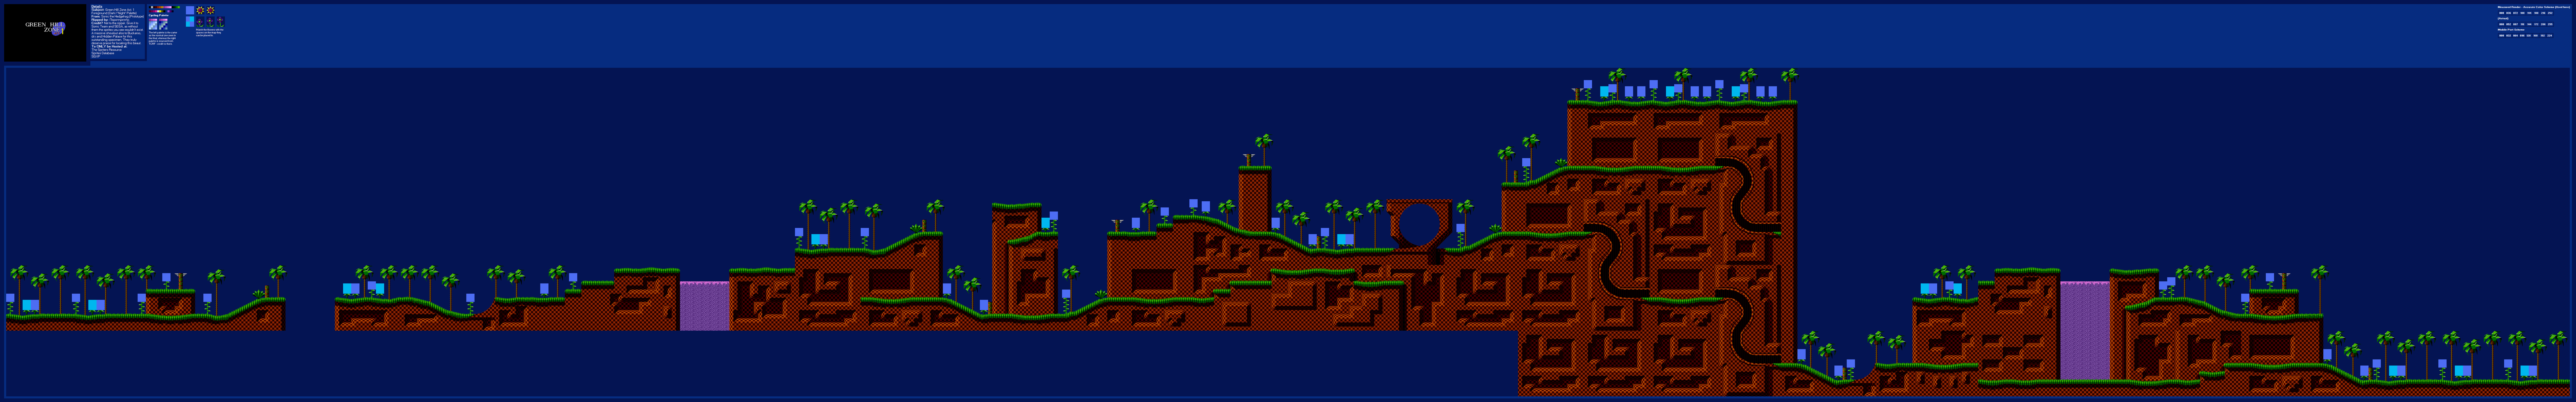 Custom / Edited - Sonic the Hedgehog Customs - Green Hill Zone Background  (Modern, Genesis-Style) - The Spriters Resource